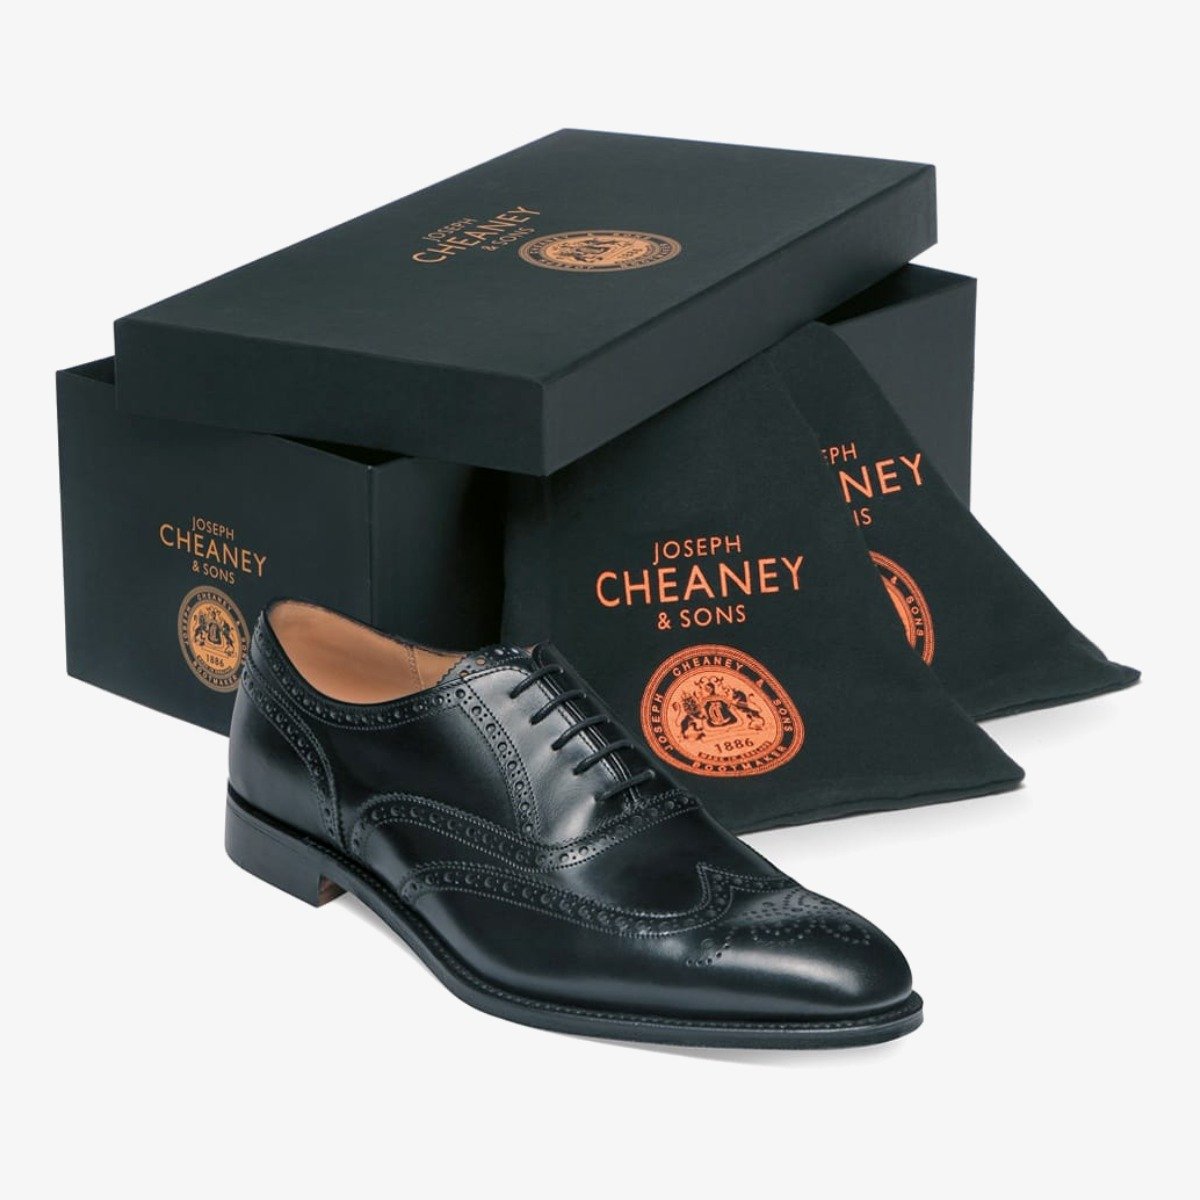 Cheaney Broad II black brogue men's oxford shoes